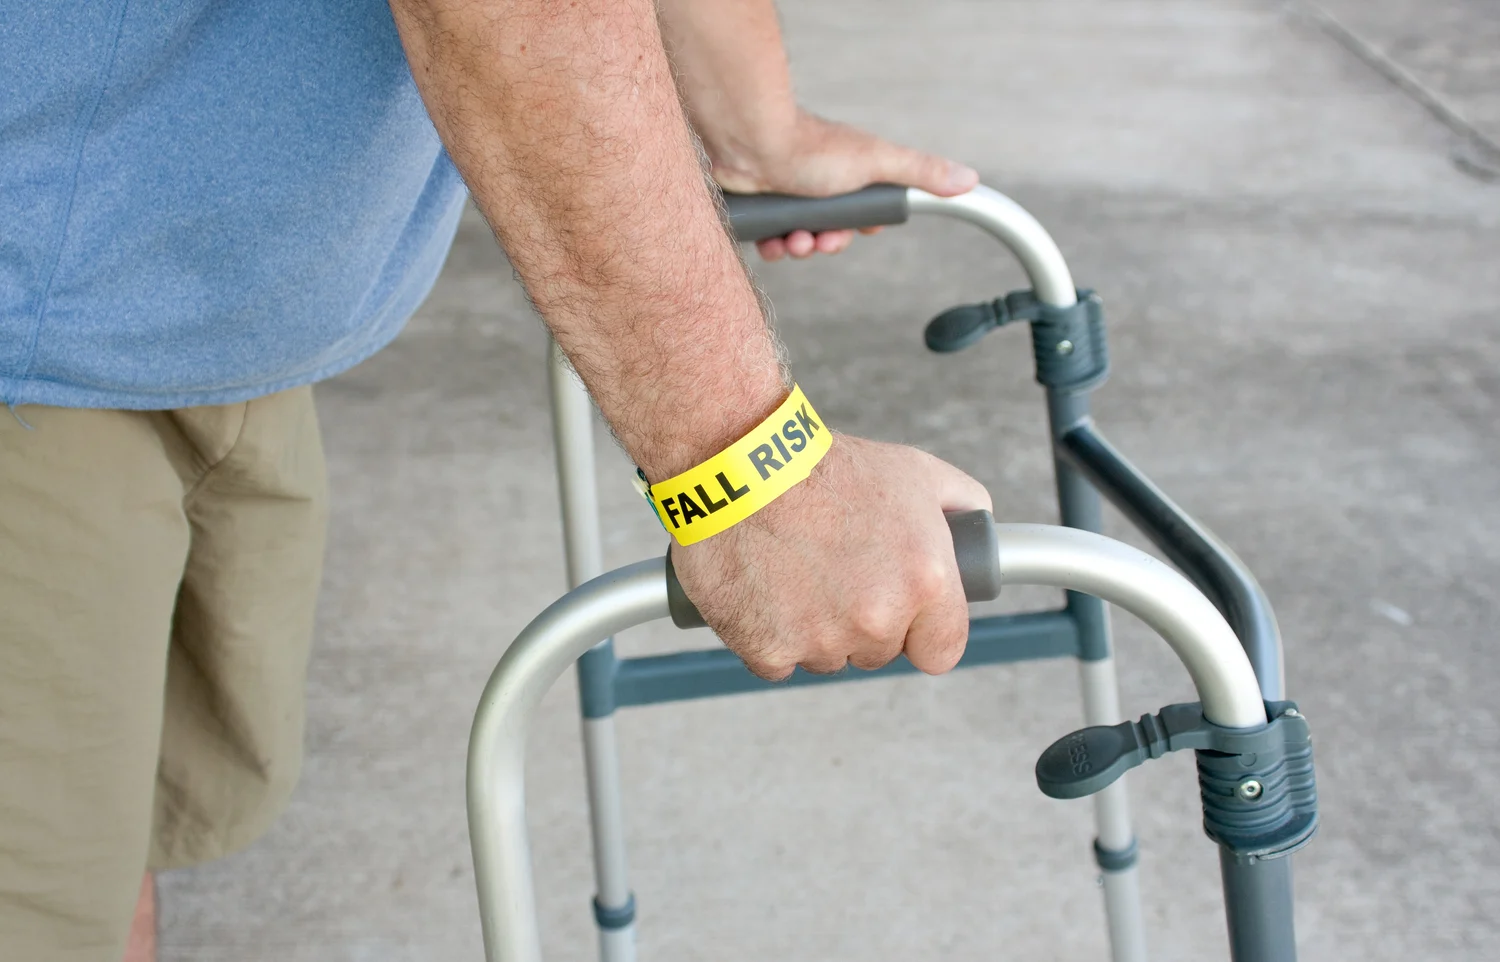 How to Properly Adjust and Use a Walking Frame for Seniors?